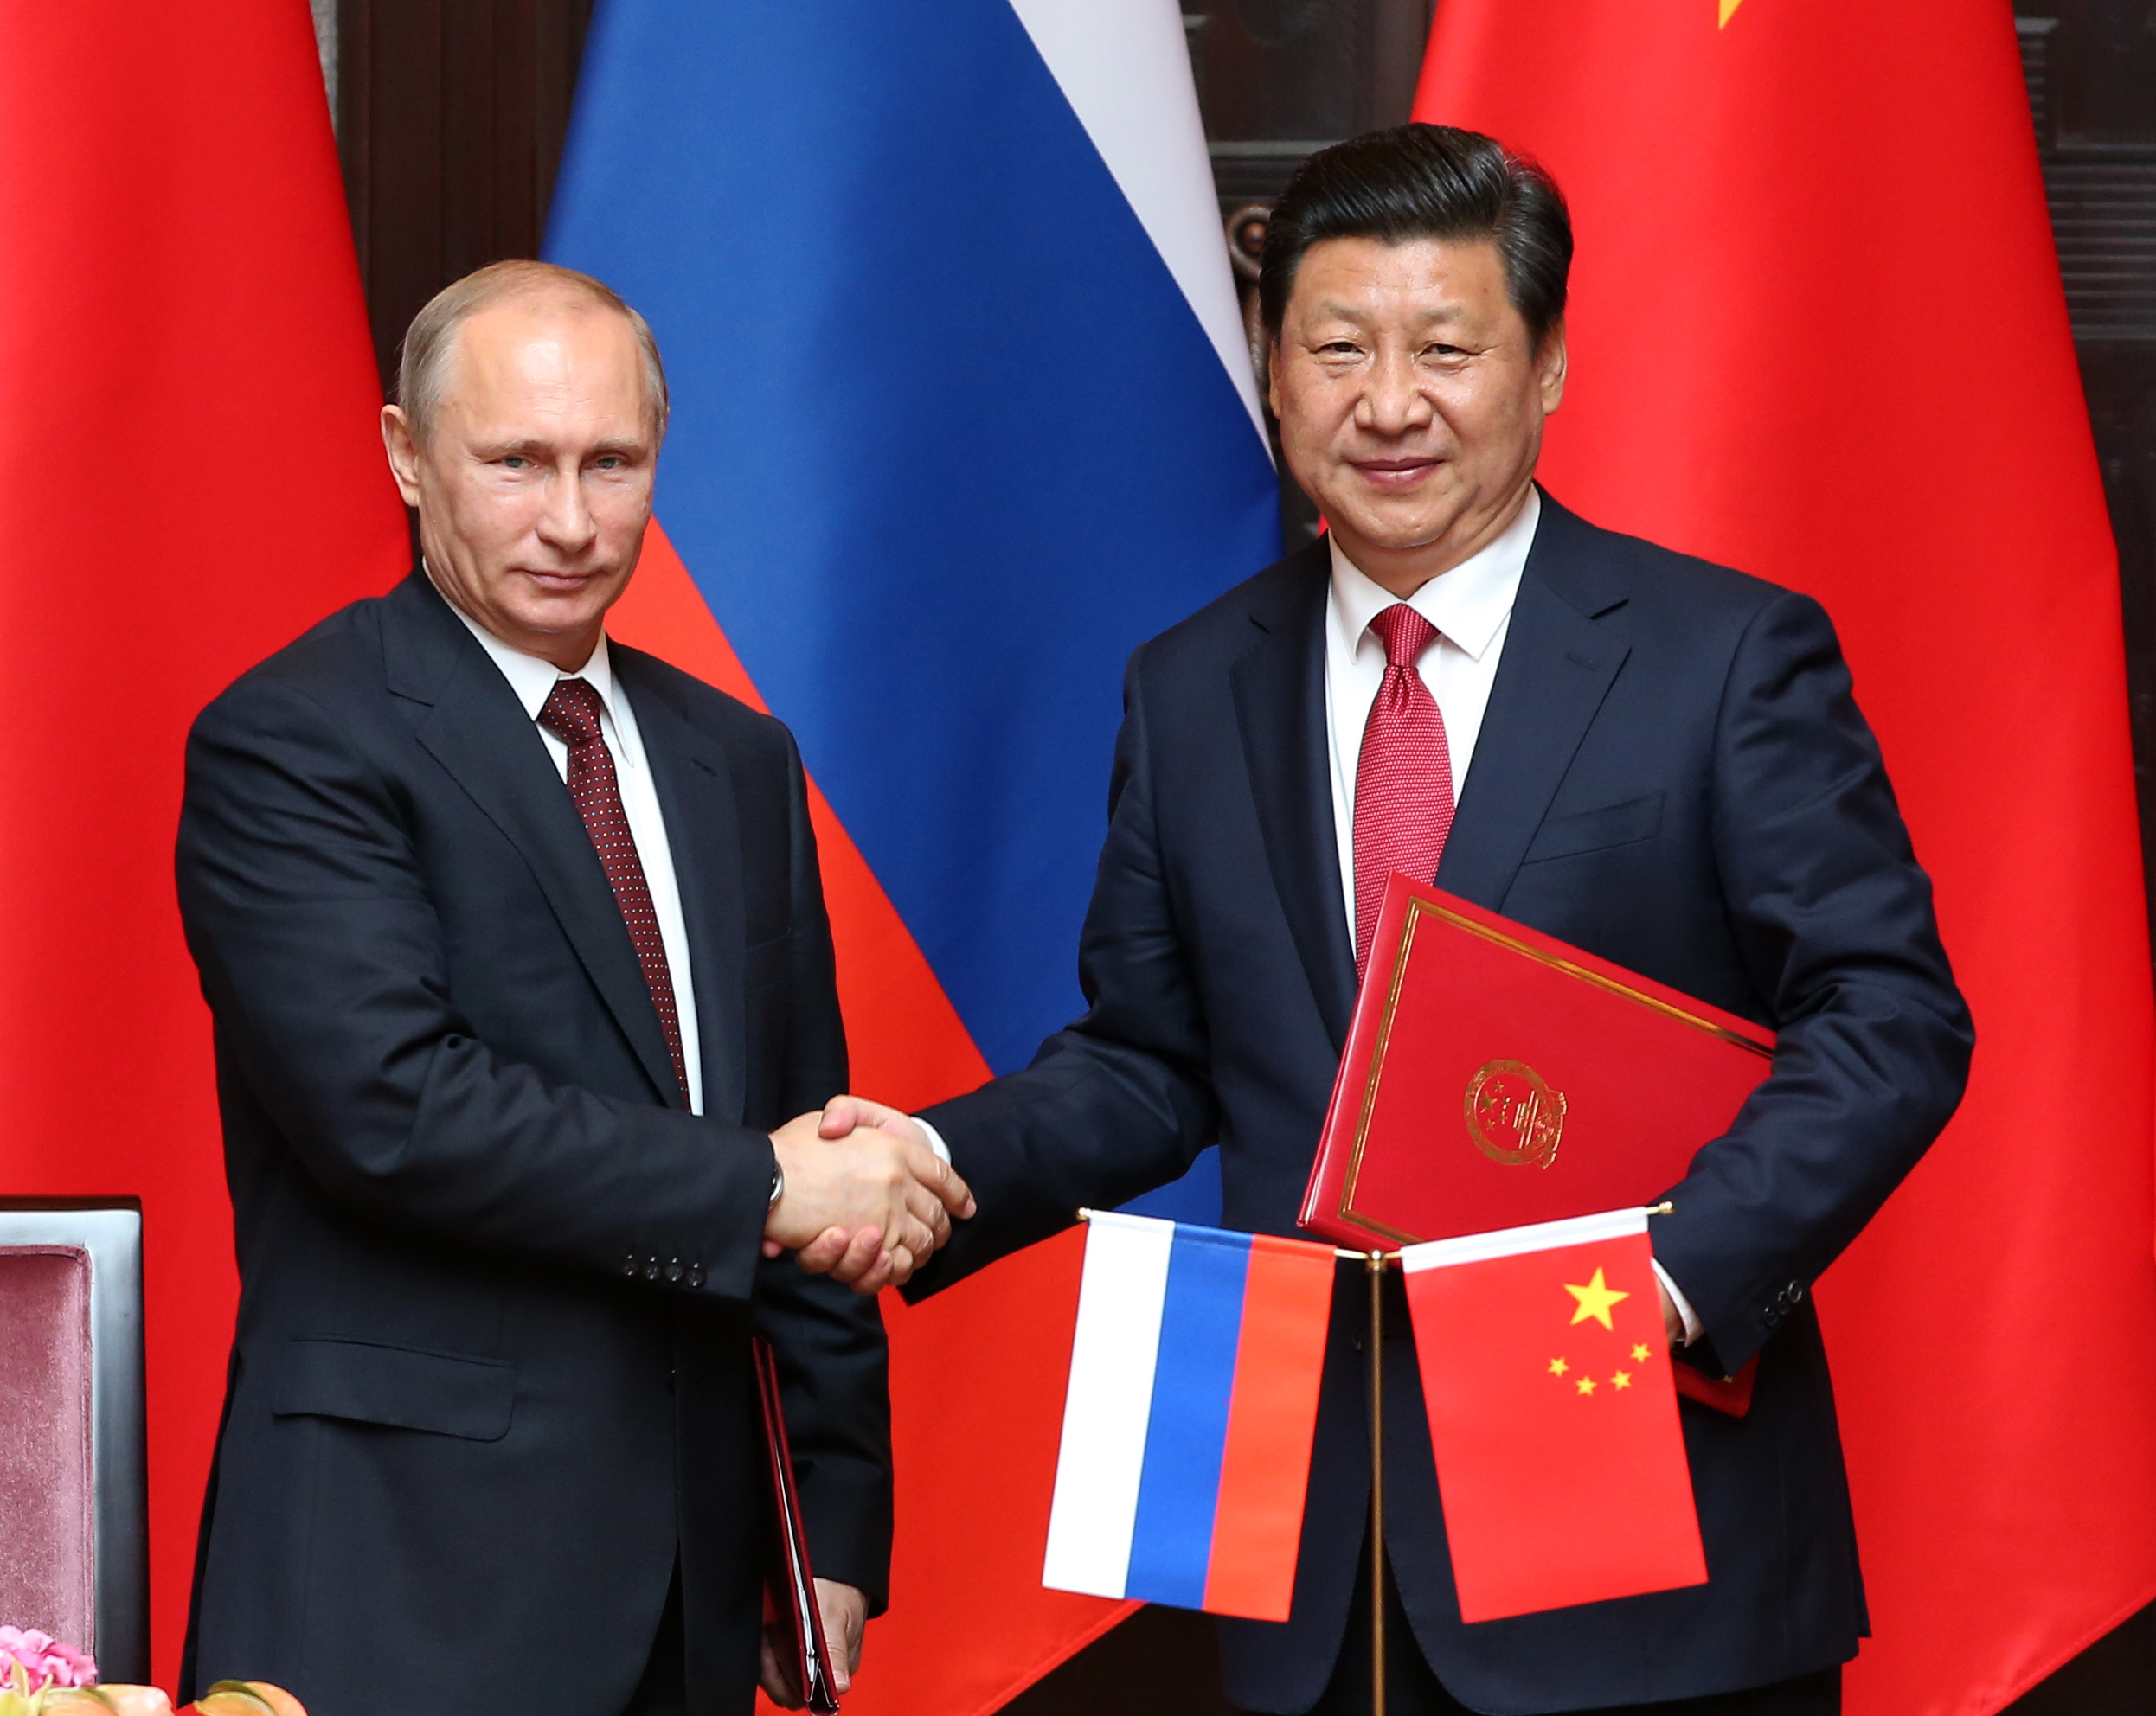 (140520) -- SHANGHAI, May 20, 2014 (Xinhua) -- Chinese President Xi Jinping (R) and Russian President Vladimir Putin sign a joint statement aimed at expanding cooperation in all fields and coordinating diplomatic efforts to cement the China-Russia all-round strategic partnership of cooperation after their talks in Shanghai, east China, May 20, 2014. (Xinhua/Pang Xinglei) (mp)